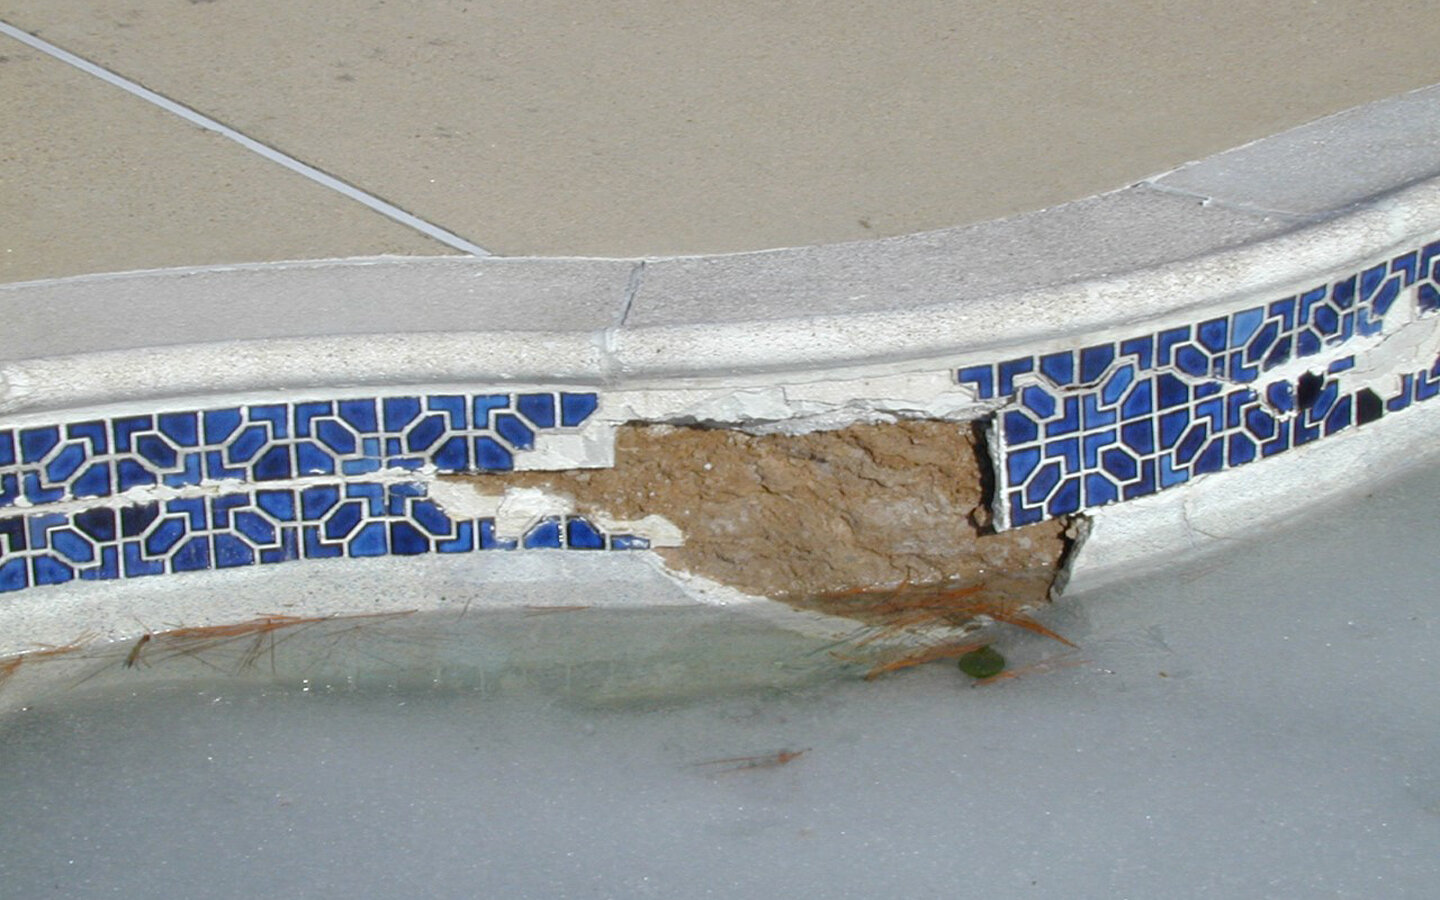  The use of epoxy repair is evident in this waterline tile failure. It’s the white stuff midway down the tile running horizontally. Use of this is a sign that the tile failed several seasons back and was temporarily repaired with this product. It did